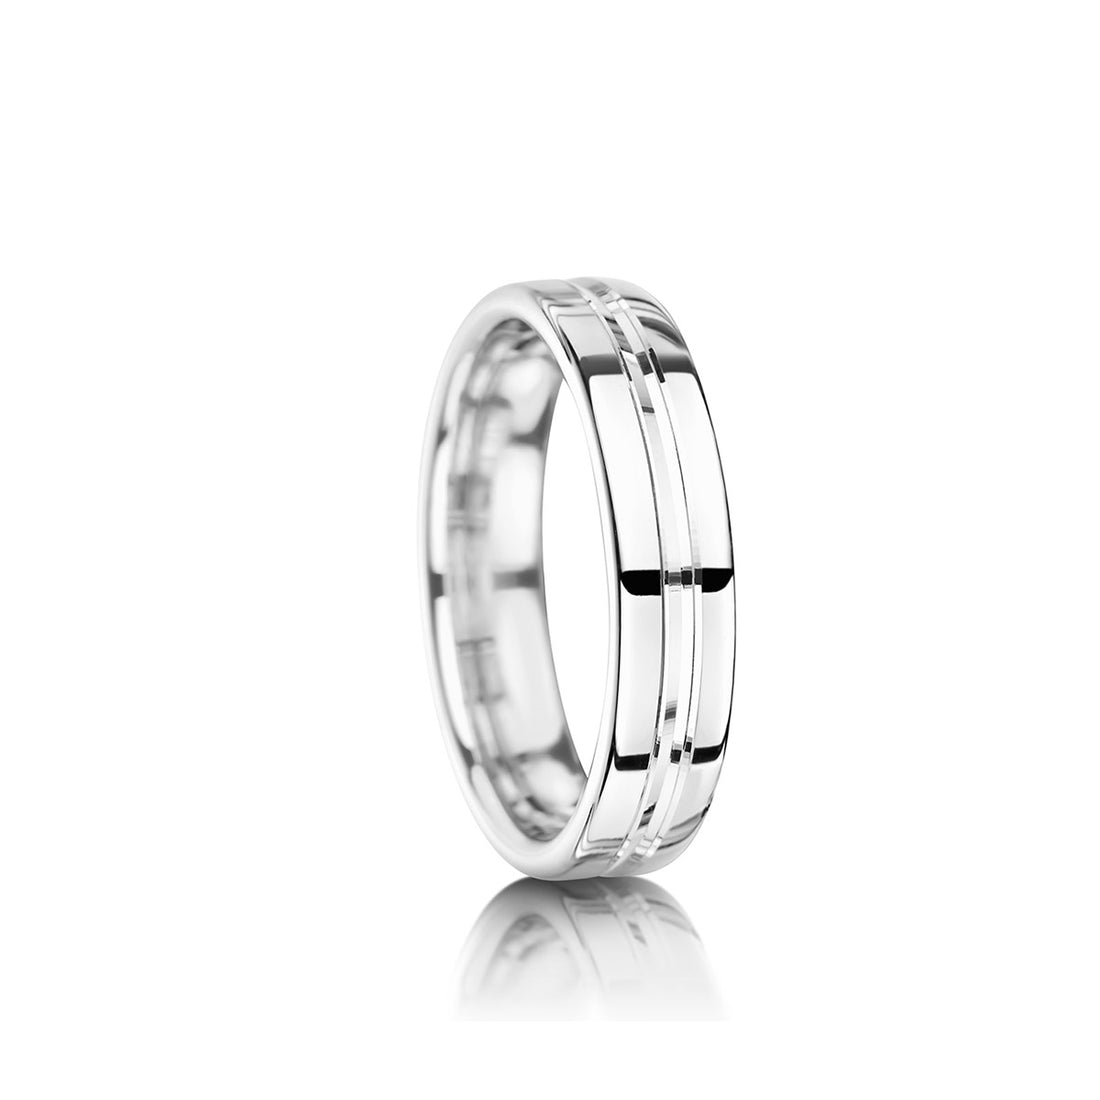 4mm Mens Wedding Band With Center Indent – MWR10